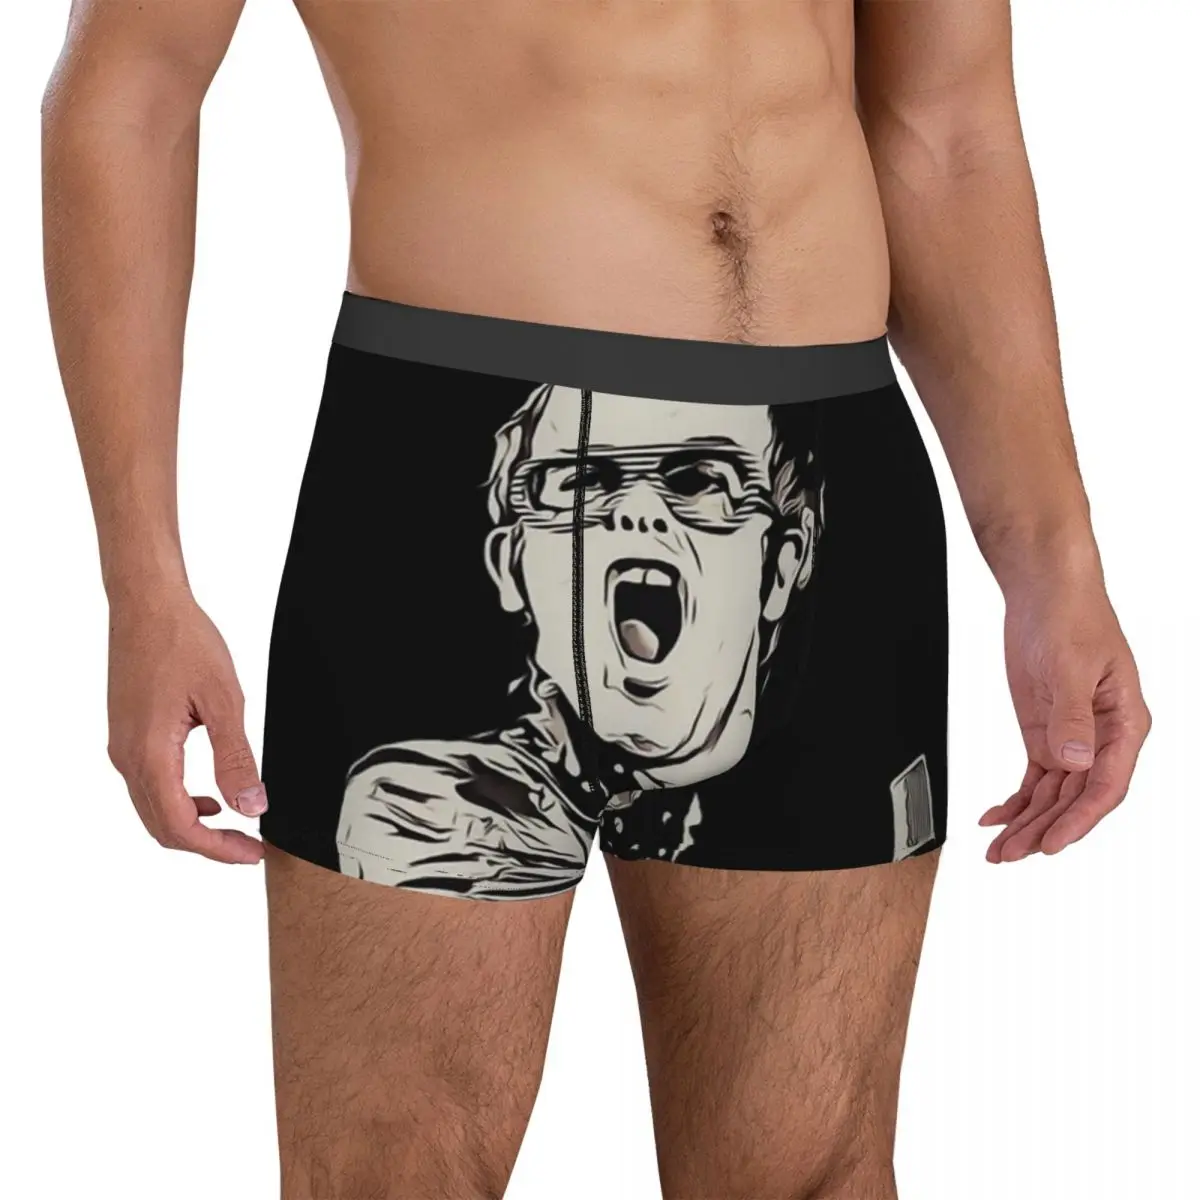 

Elton John Galaxy Underwear singer happy youtube cool 3D Pouch High Quality Trunk Customs Boxer Brief Cute Man Panties Big Size